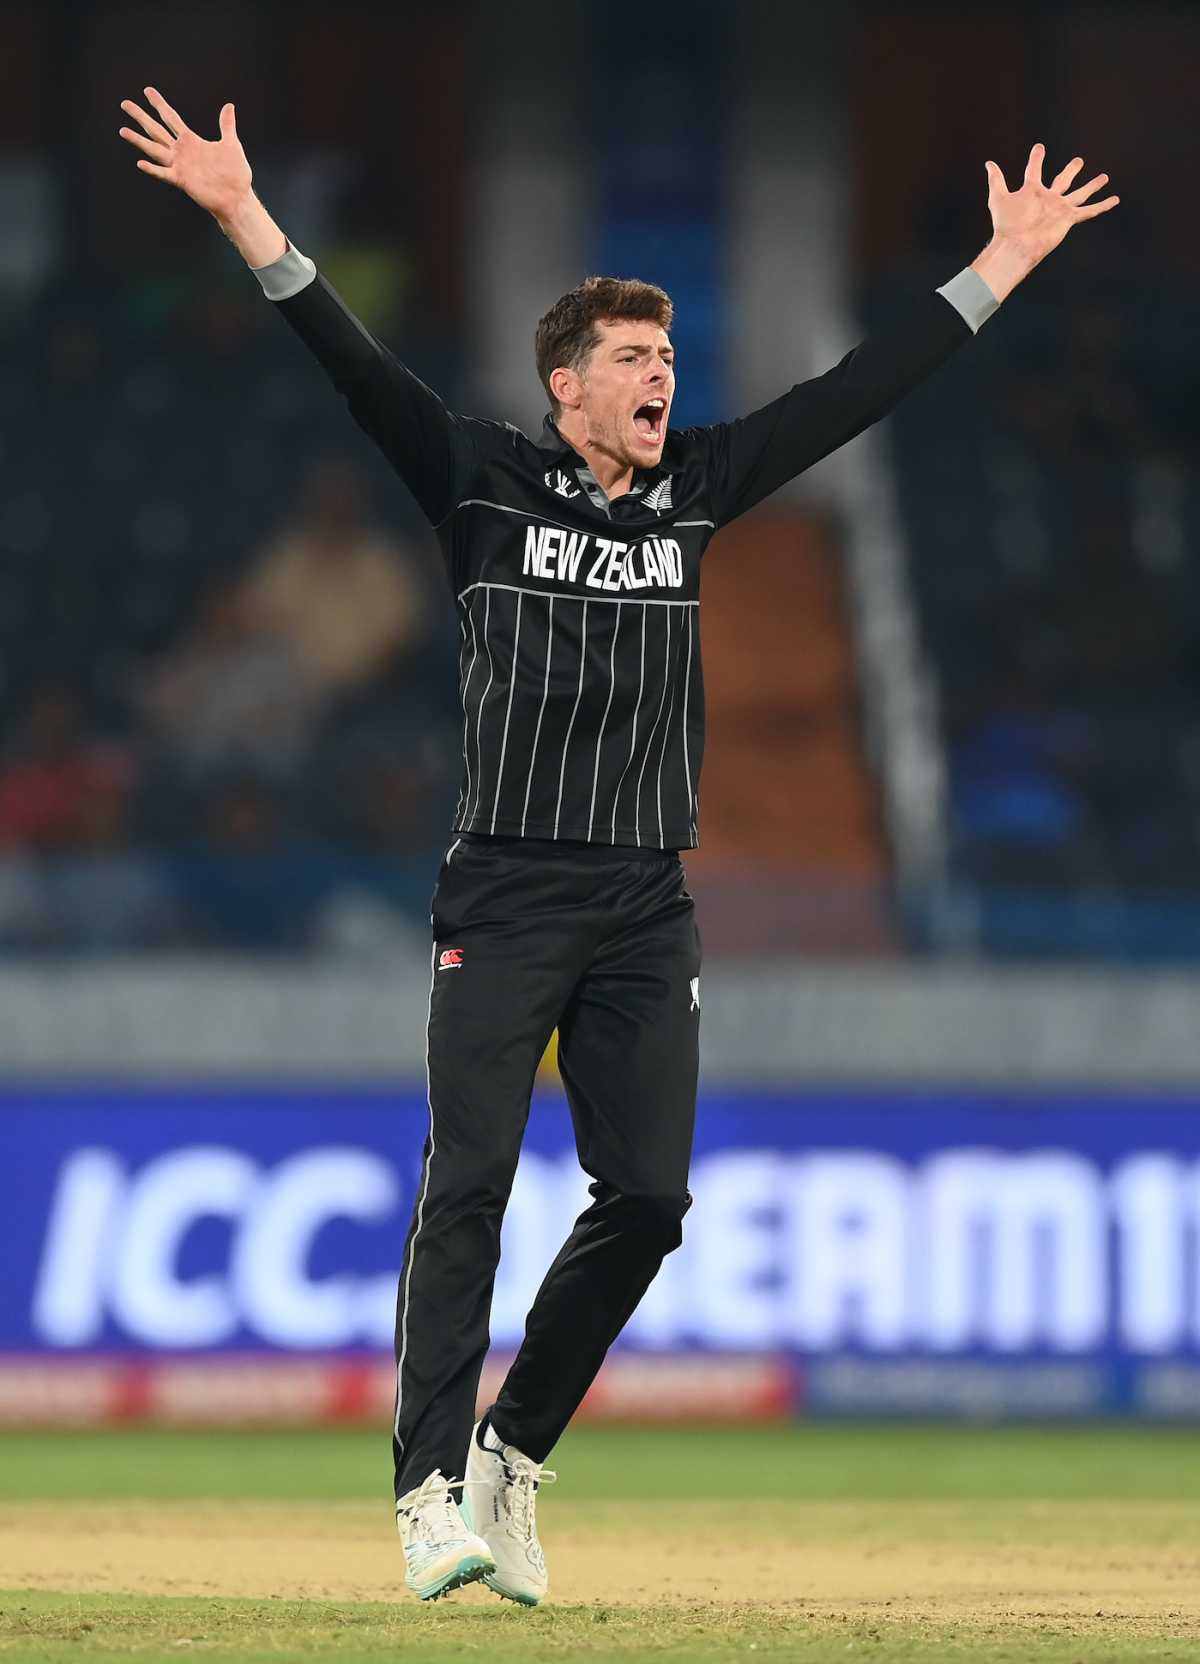 Mitchell Santner Has Been in Great form with the ball for the Kiwis. Pic Credits-X